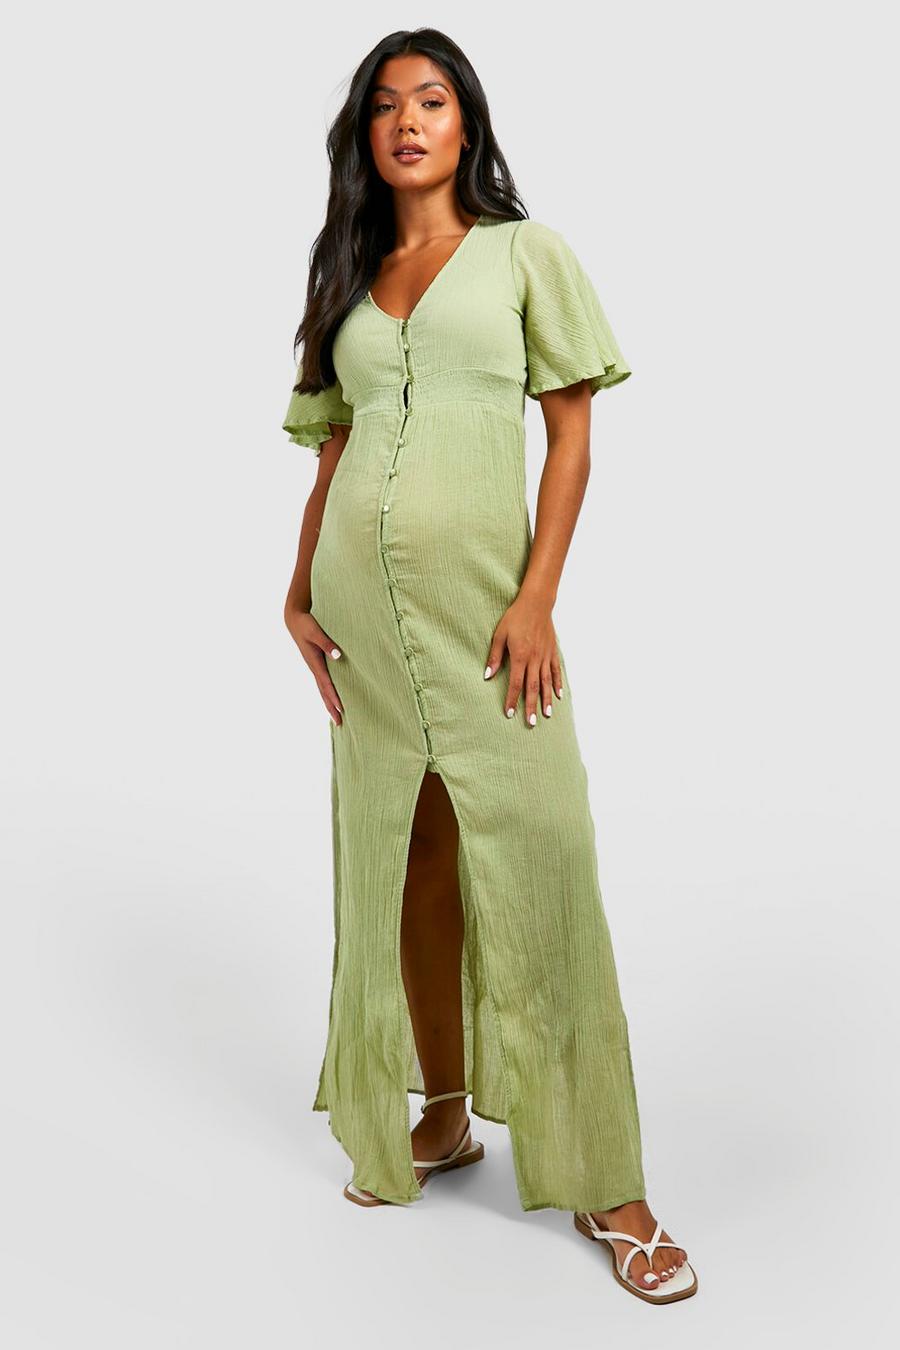 Sage green Jumpsuits & Playsuits